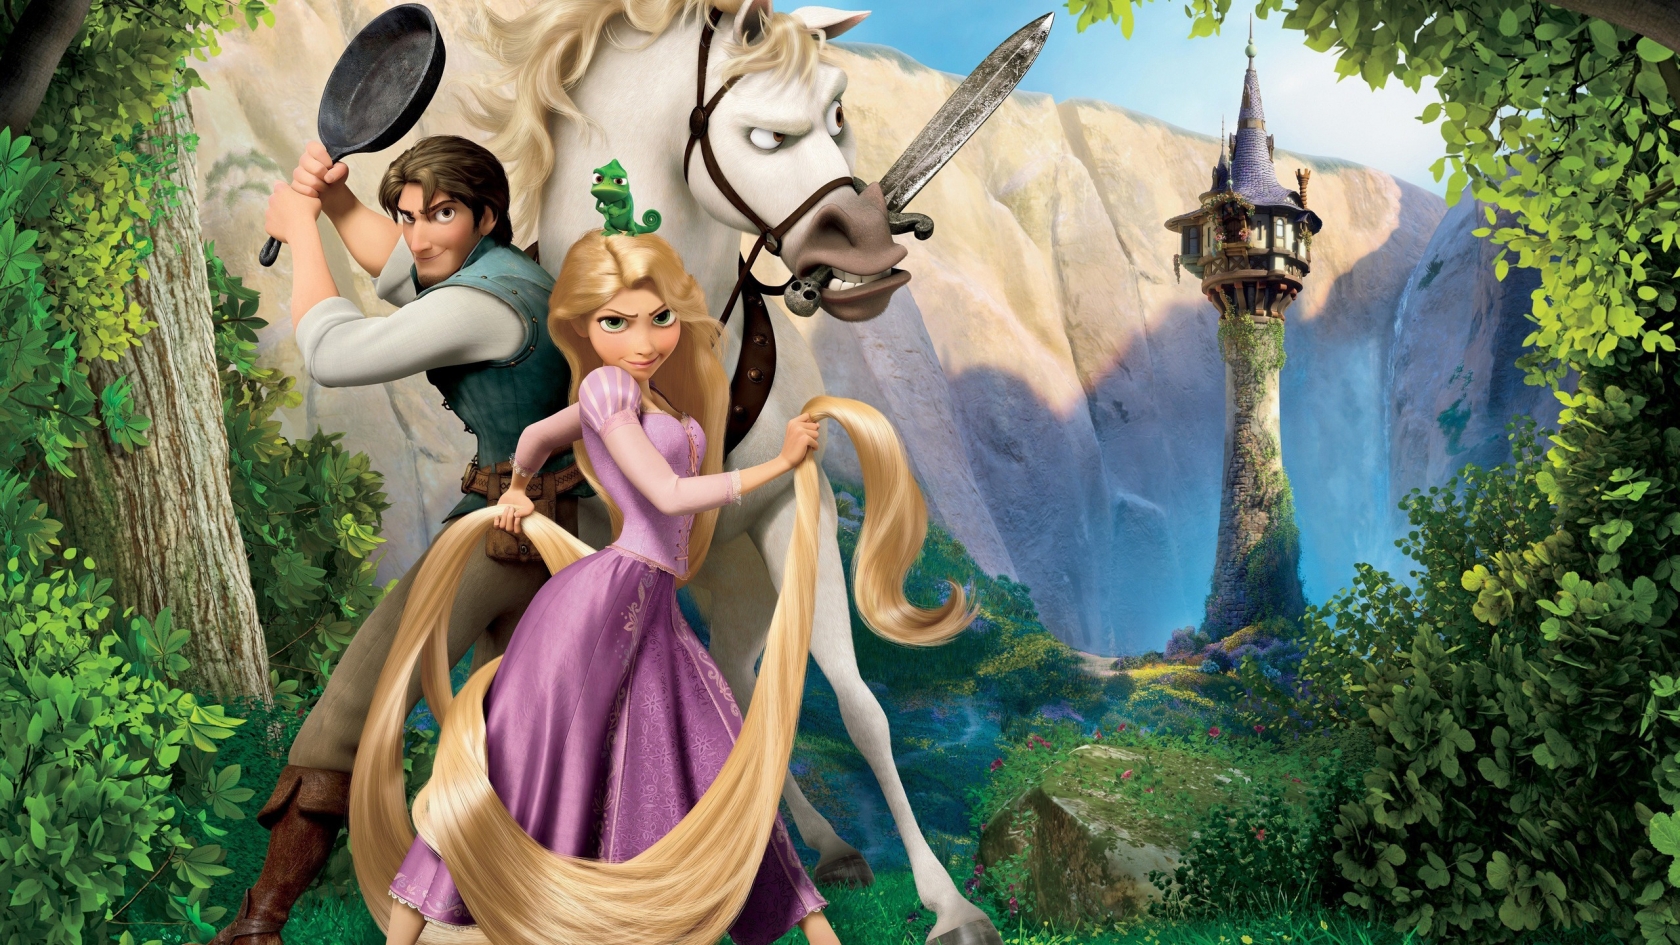 Tangled Animated Musical Film for 1680 x 945 HDTV resolution